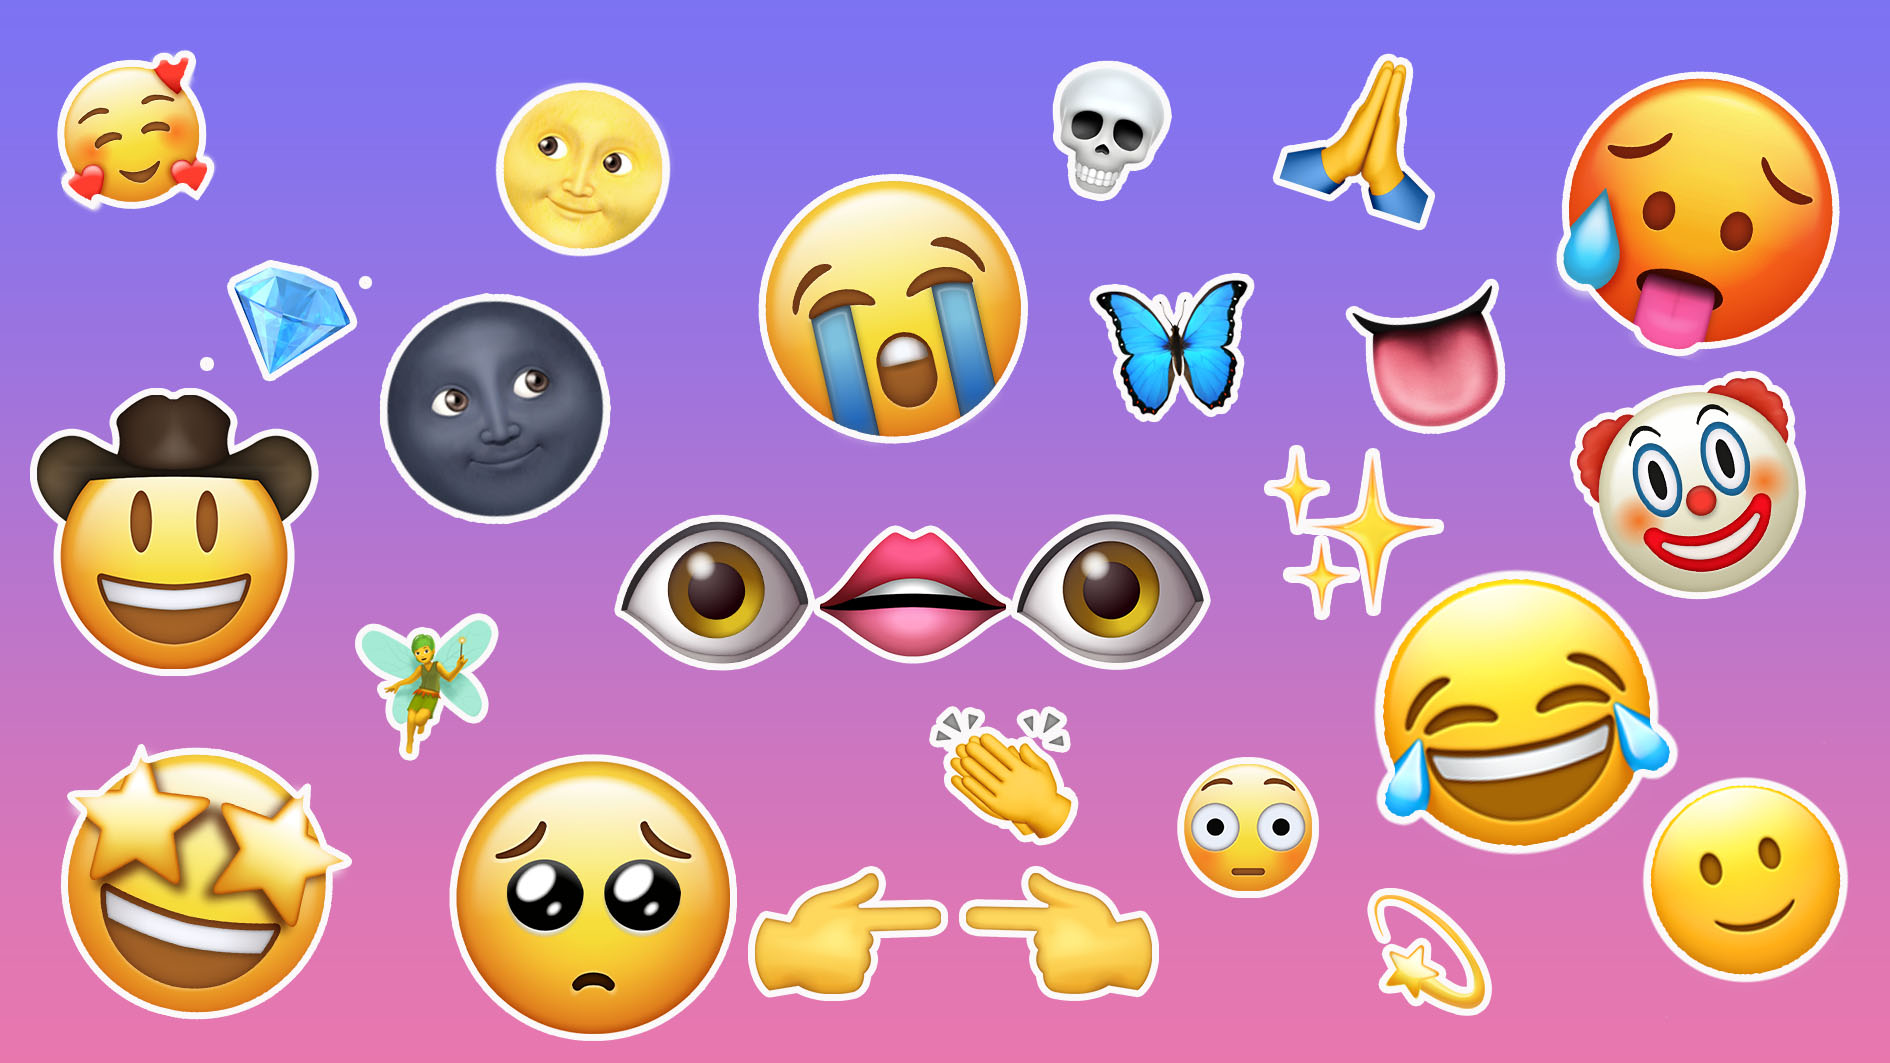 How the Cry-Laughing Face Became the Most Divisive Emoji in History